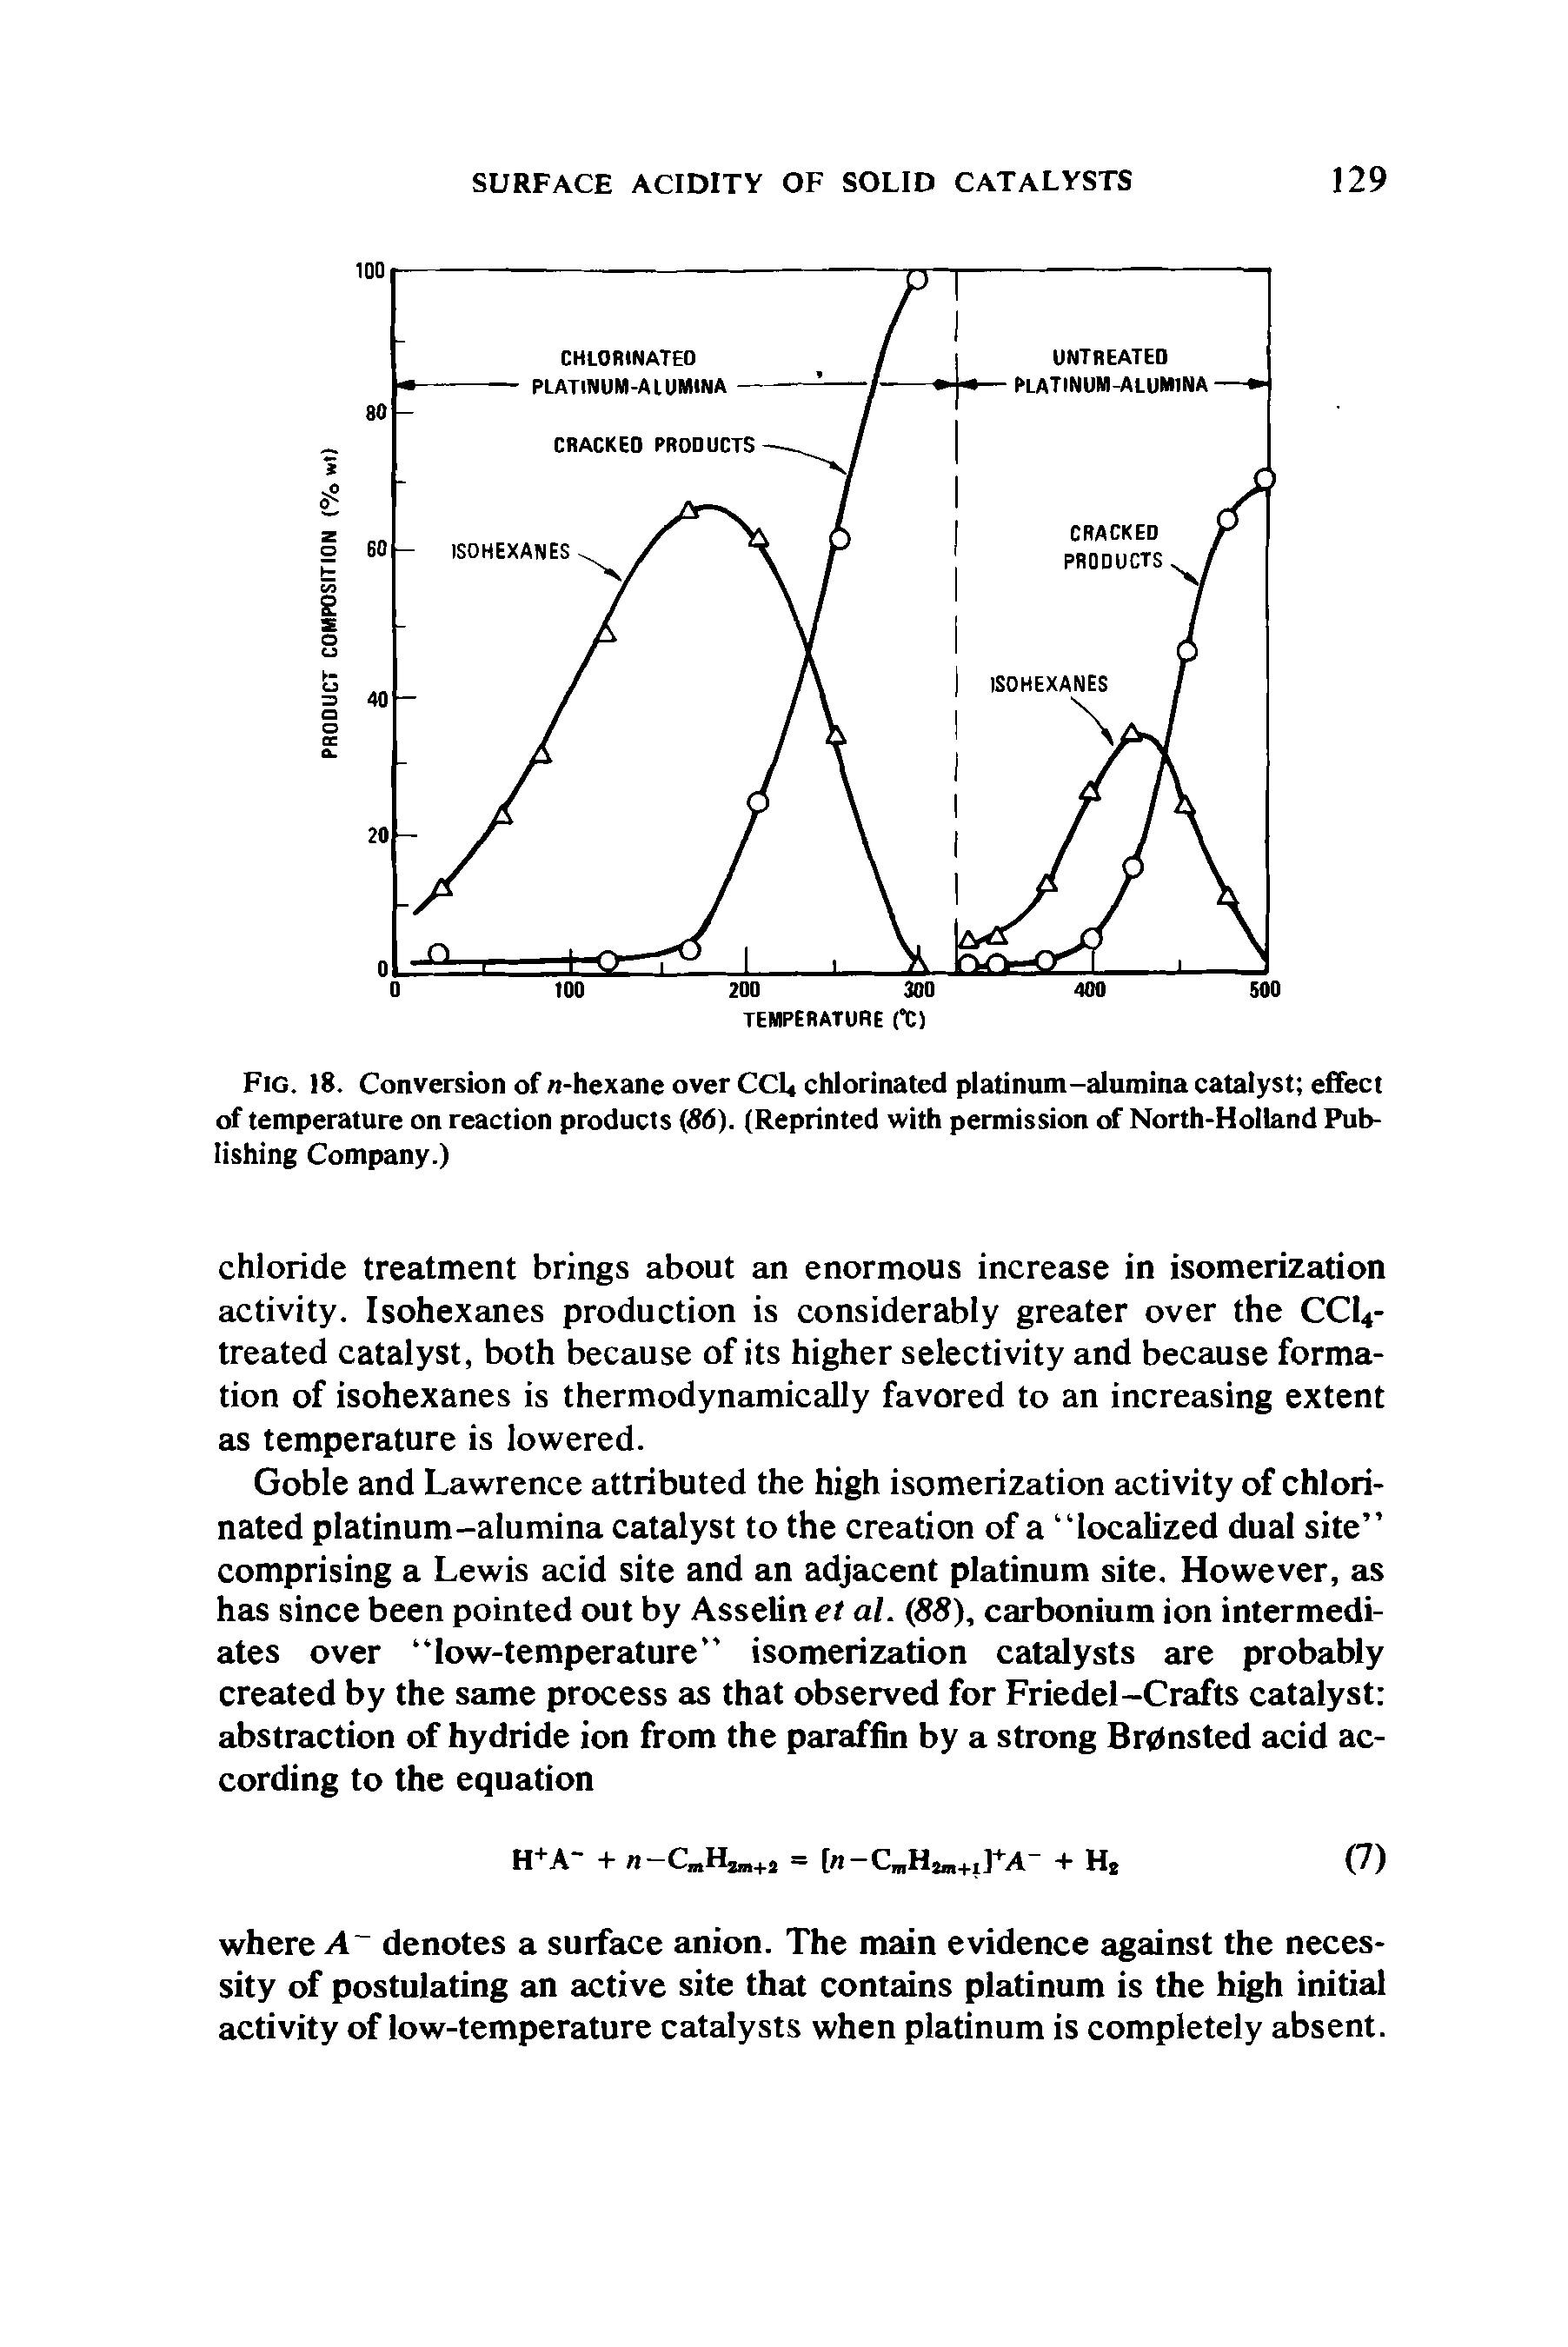 Fig. 18. Conversion of n-hexane over CCU chlorinated platinum-alumina catalyst effect of temperature on reaction products 86). (Reprinted with permission of North-Holland Publishing Company.)...